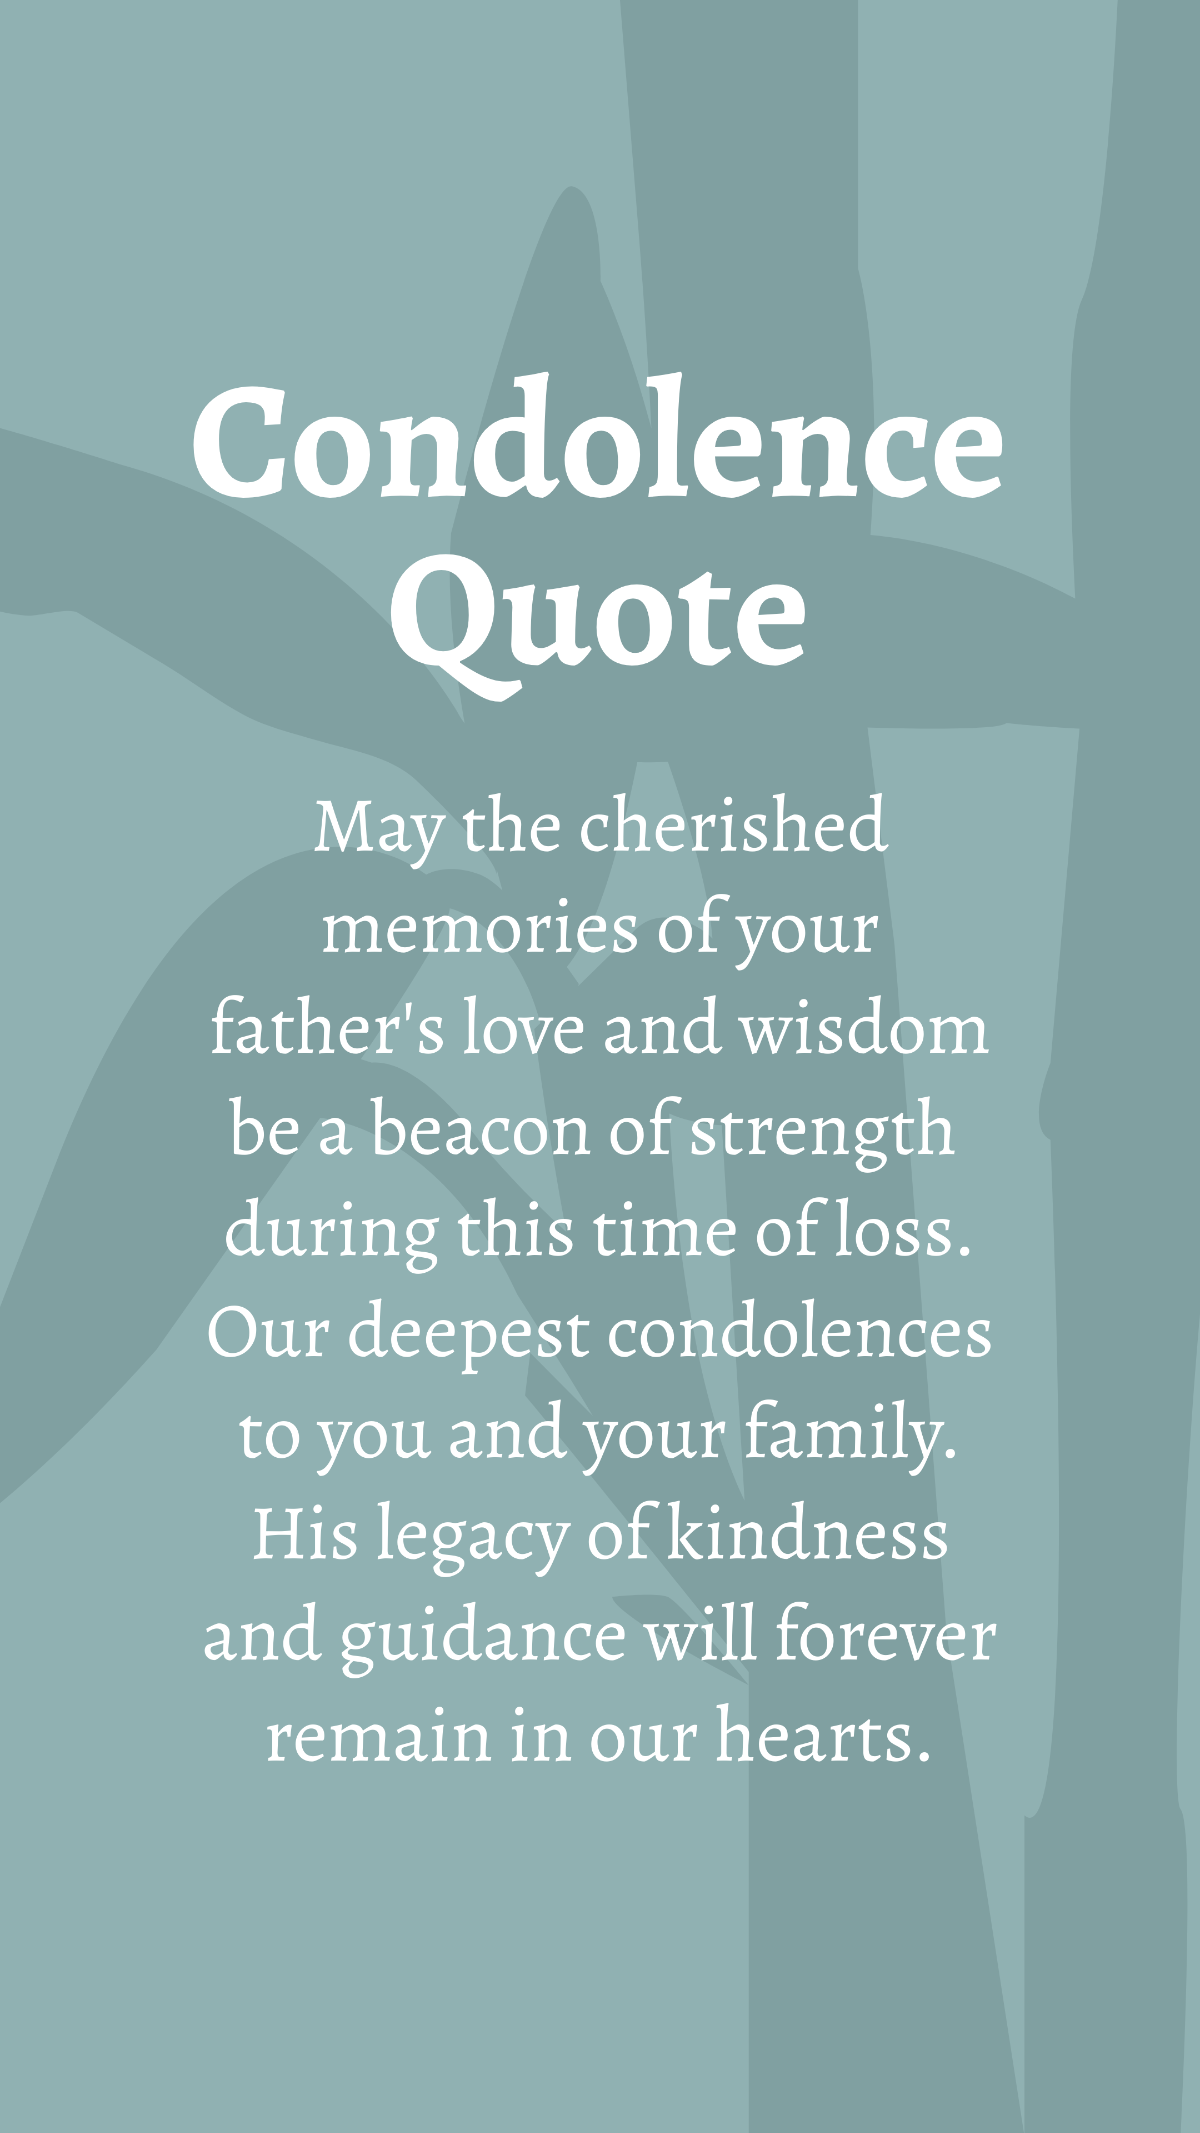 Condolence Loss Of Your Father Quote